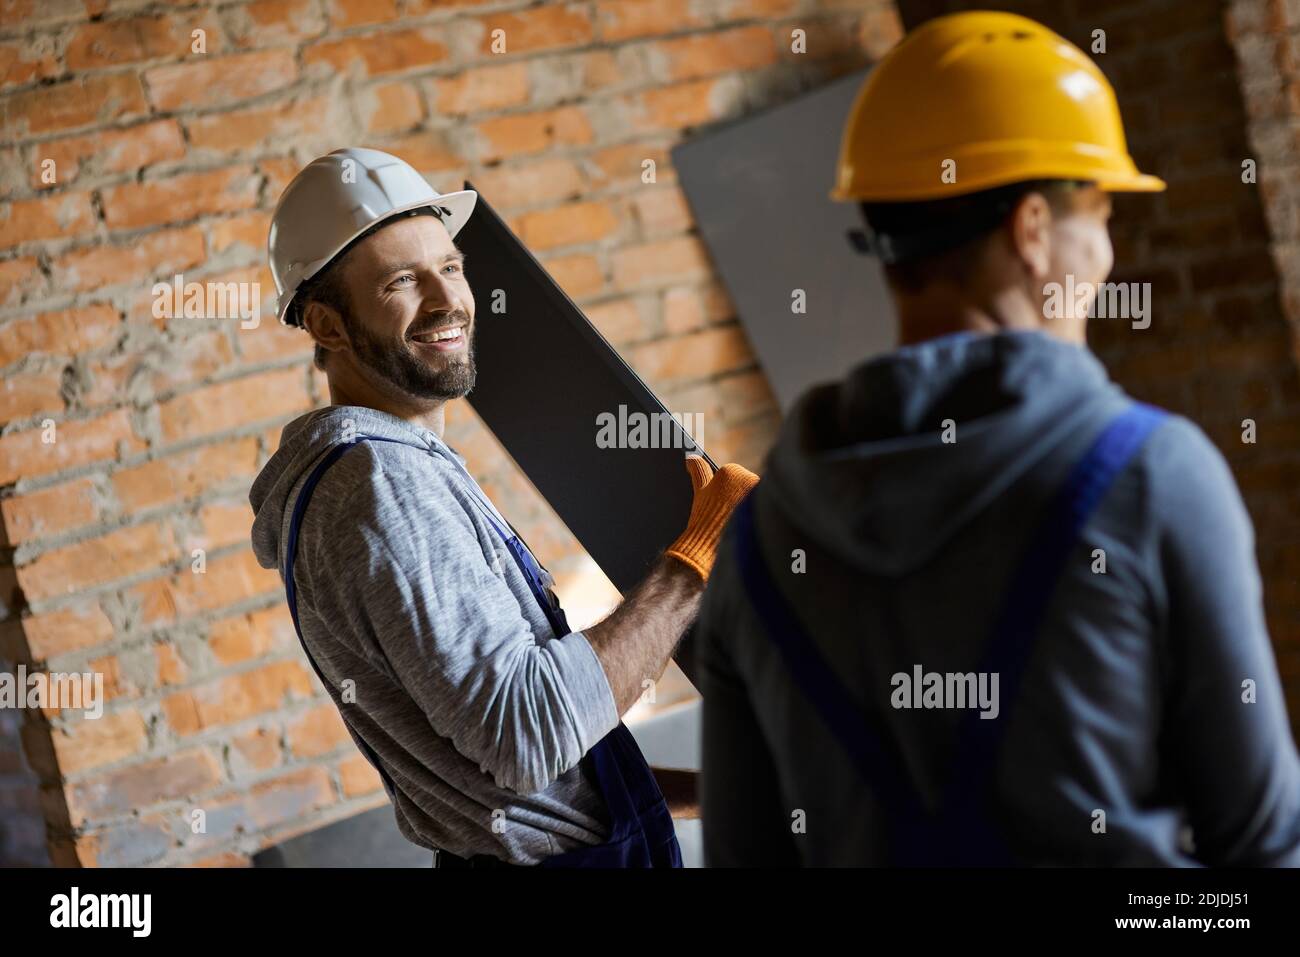 Cheerful young male builders wearing hard hats smiling, holding metal stud for drywall while working together at construction site. Building house, profession, teamwork concept Stock Photo